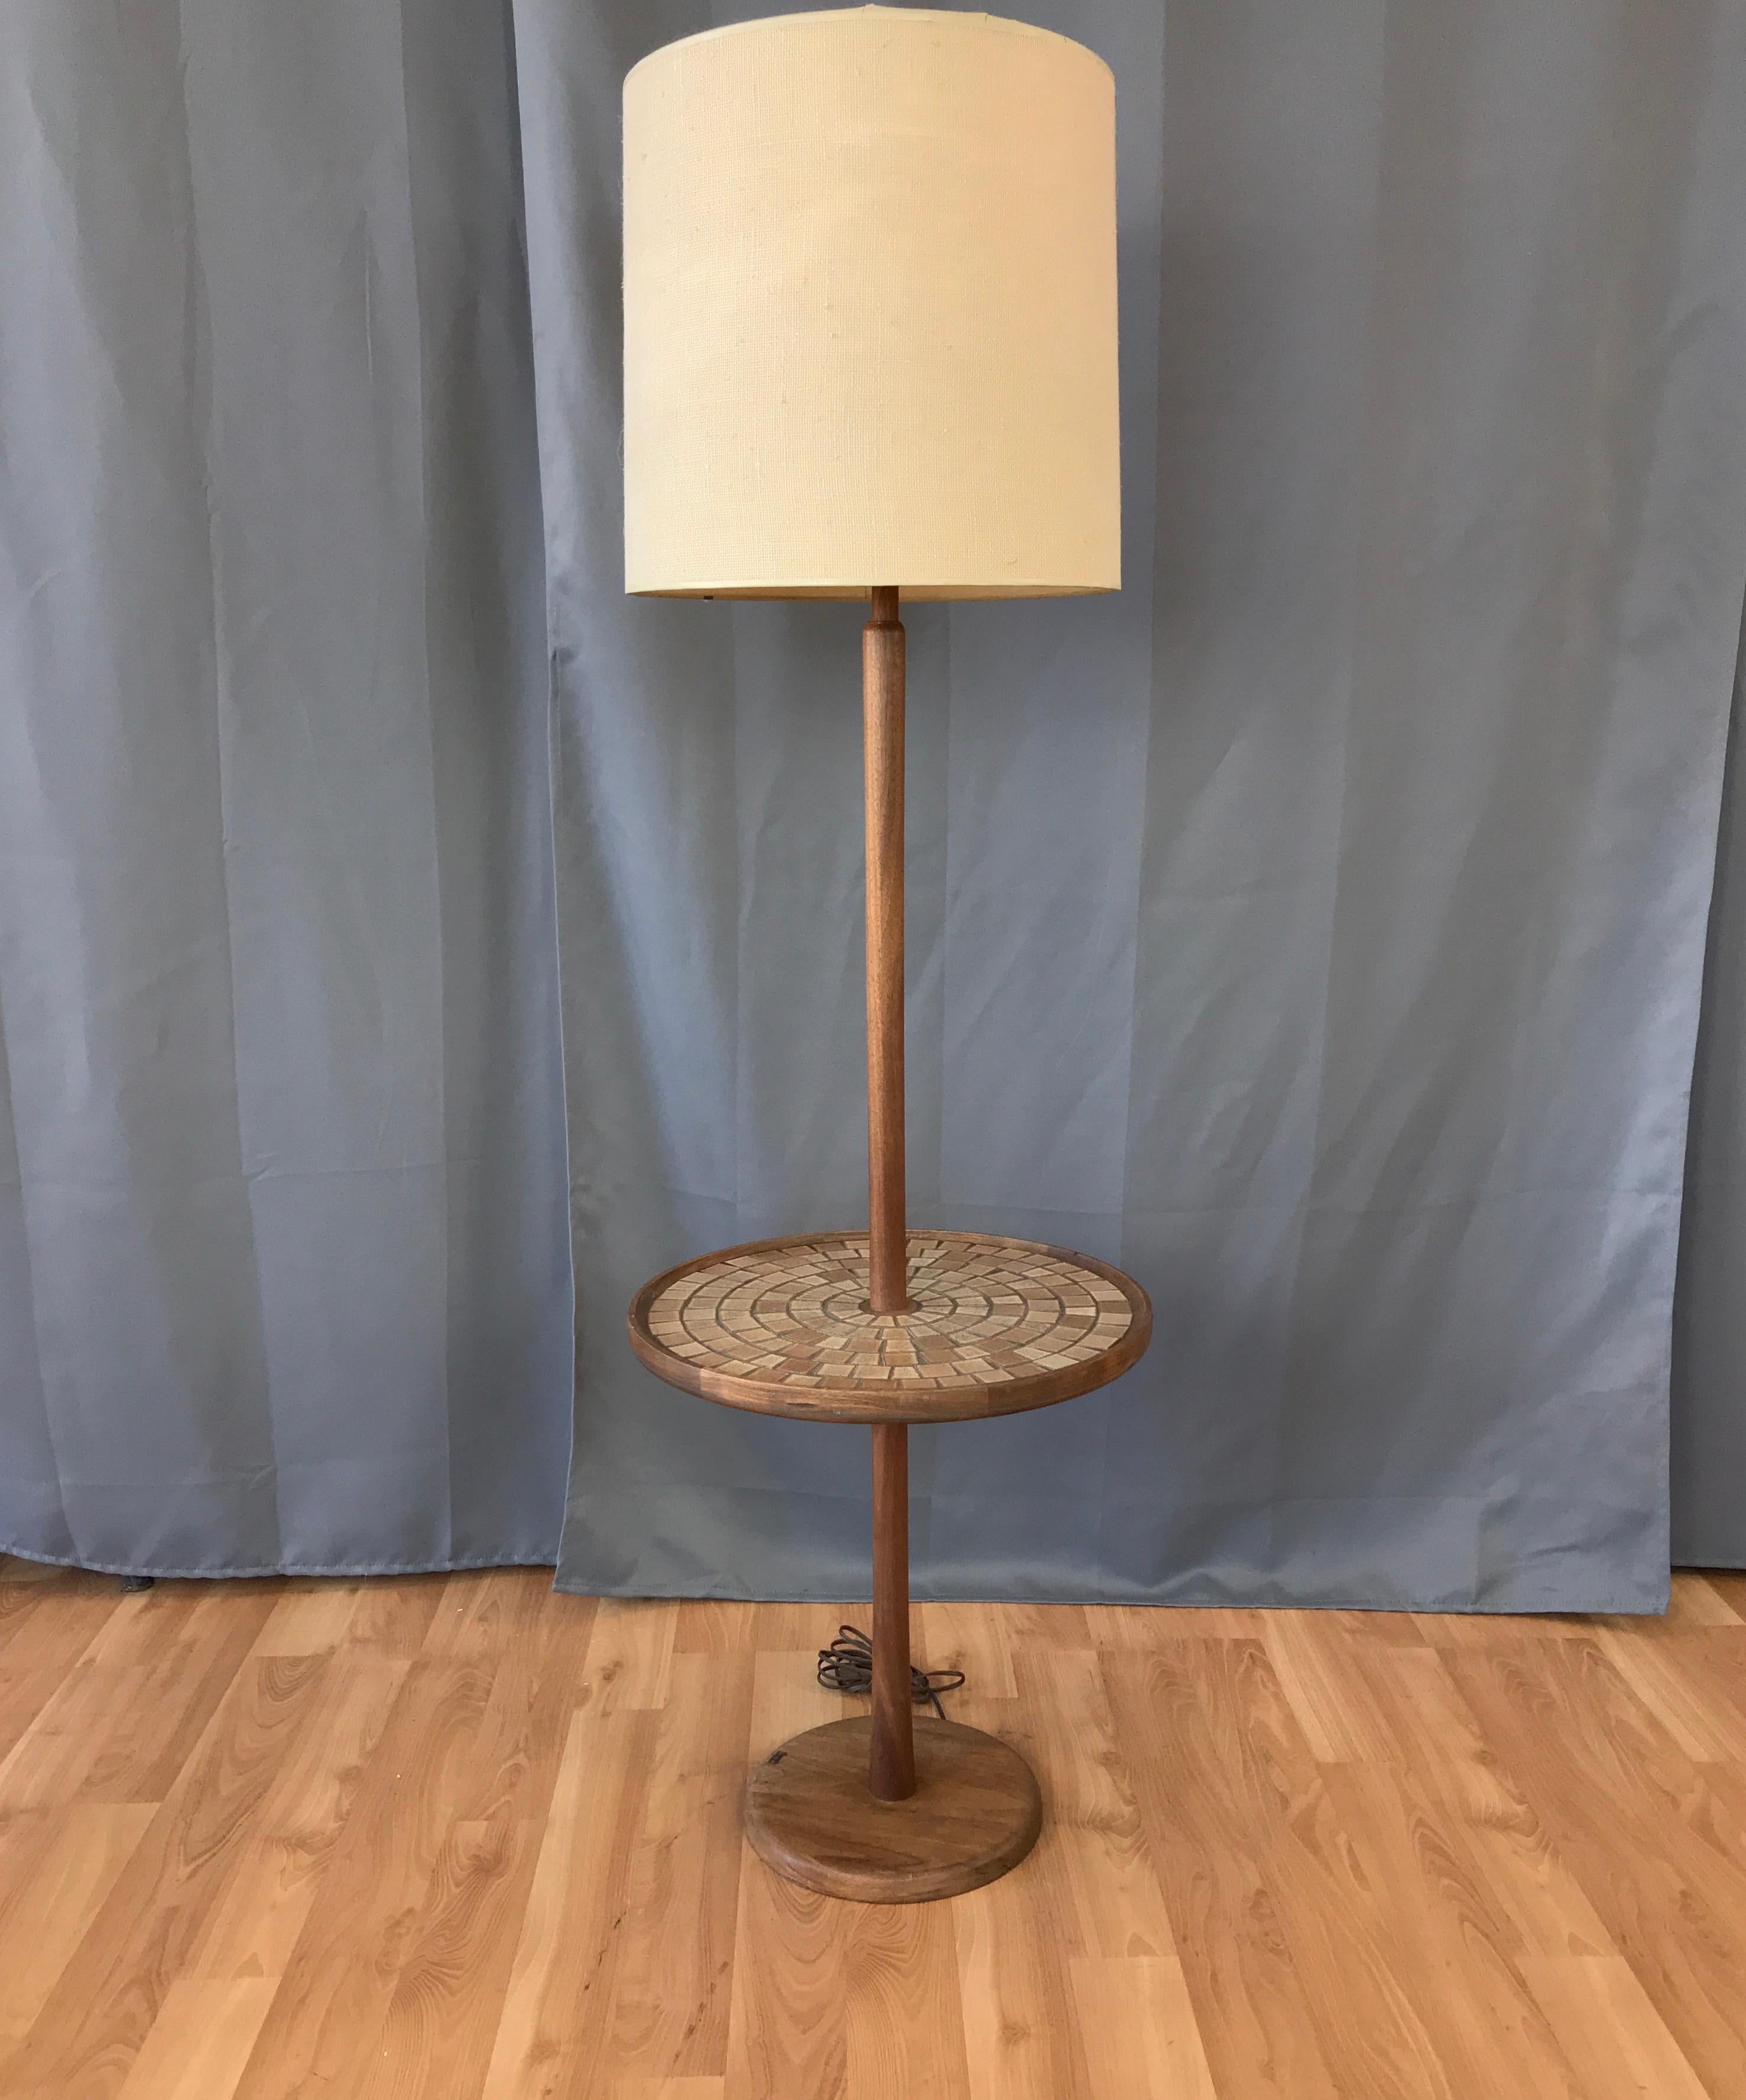 A model W4 walnut floor lamp with integrated tile top table designed by Gordon & Jane Martz for Marshall Studios, and introduced in the early 1960s. 

Handsomely crafted stem and base are solid walnut, with very nice design details on display